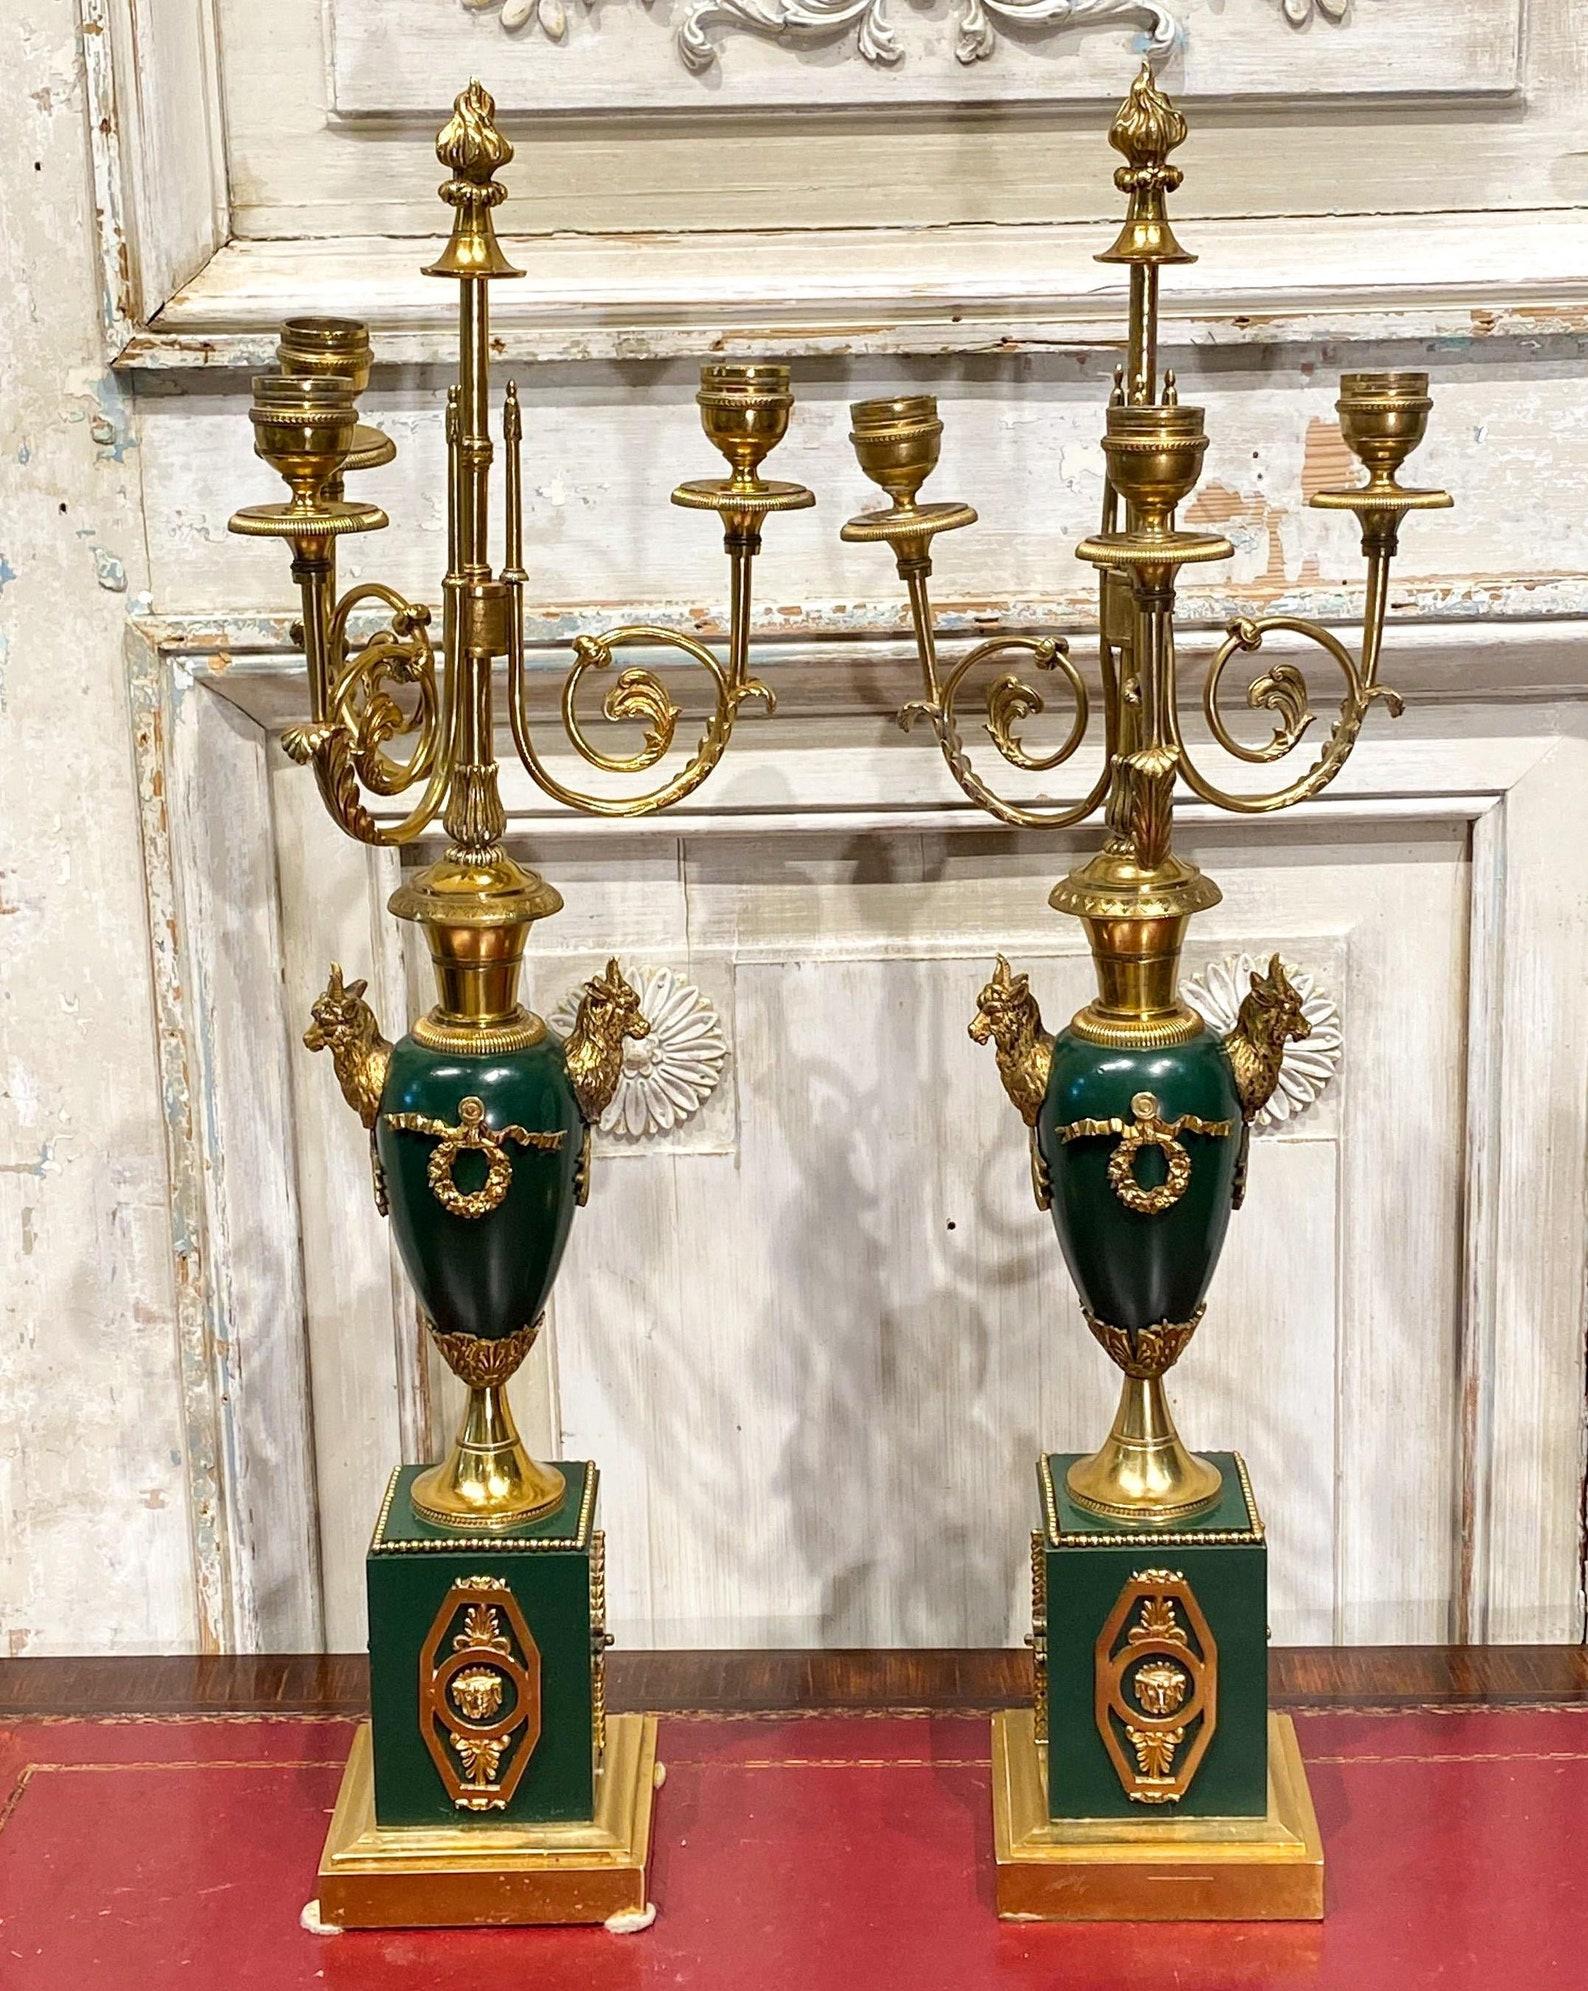 A stunning pair of period Empire gilt patinated brass and bronze candelabras.

Born in France in the early 19th century, fine quality and detailing, elaborately decorated, unique design, likely Parisian, with strong classical era influence.